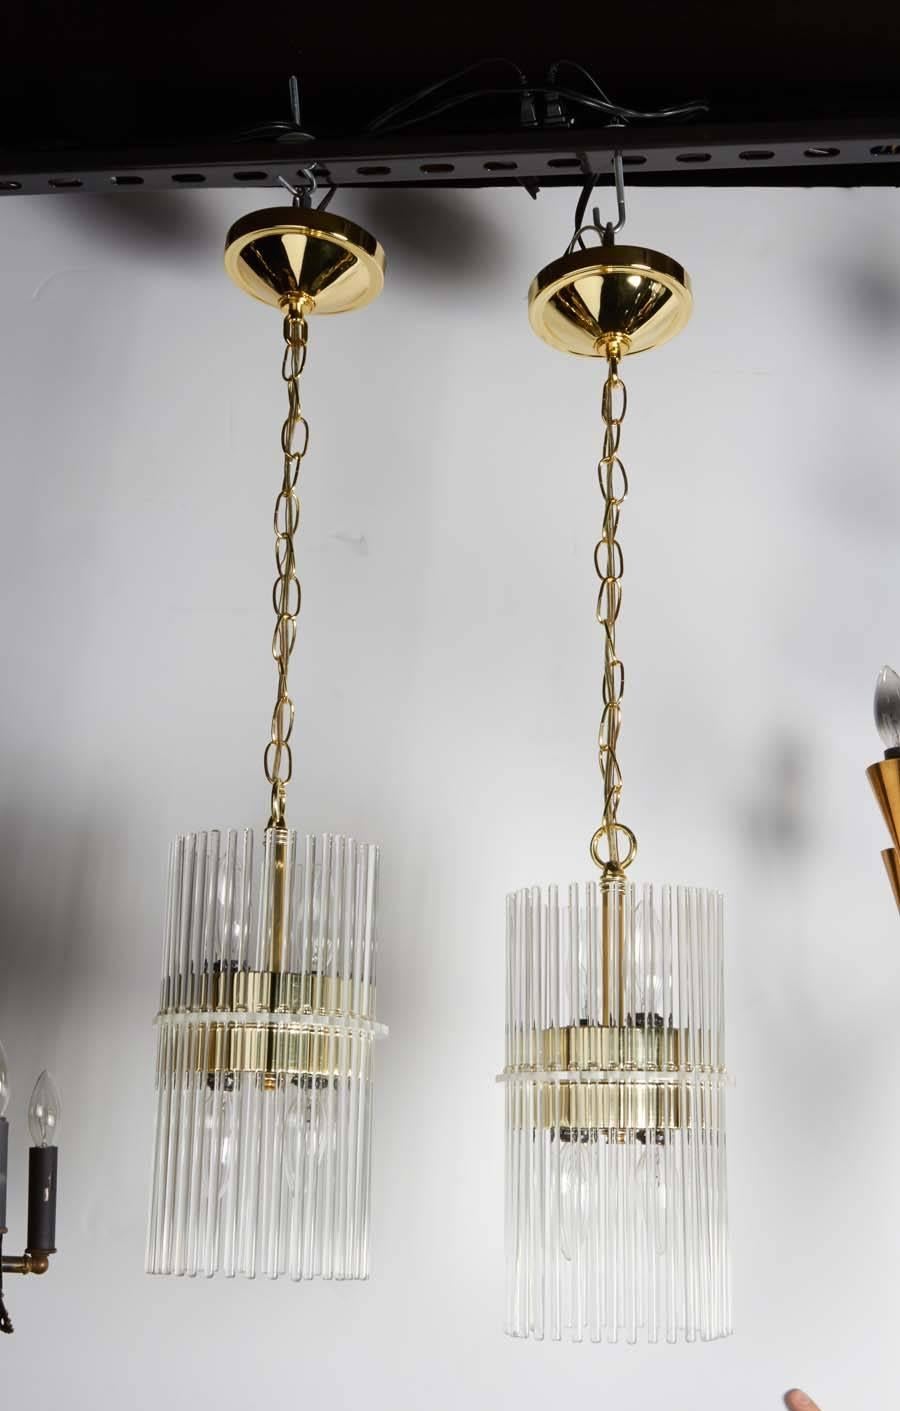 Pair of modernist glass rod pendant lights by Gaetano Sciolari for Lightolier. The fixtures have a lantern style design featuring numerous glass rods that independently suspend from a Lucite center disc. The pendants have a brass inner frame as well